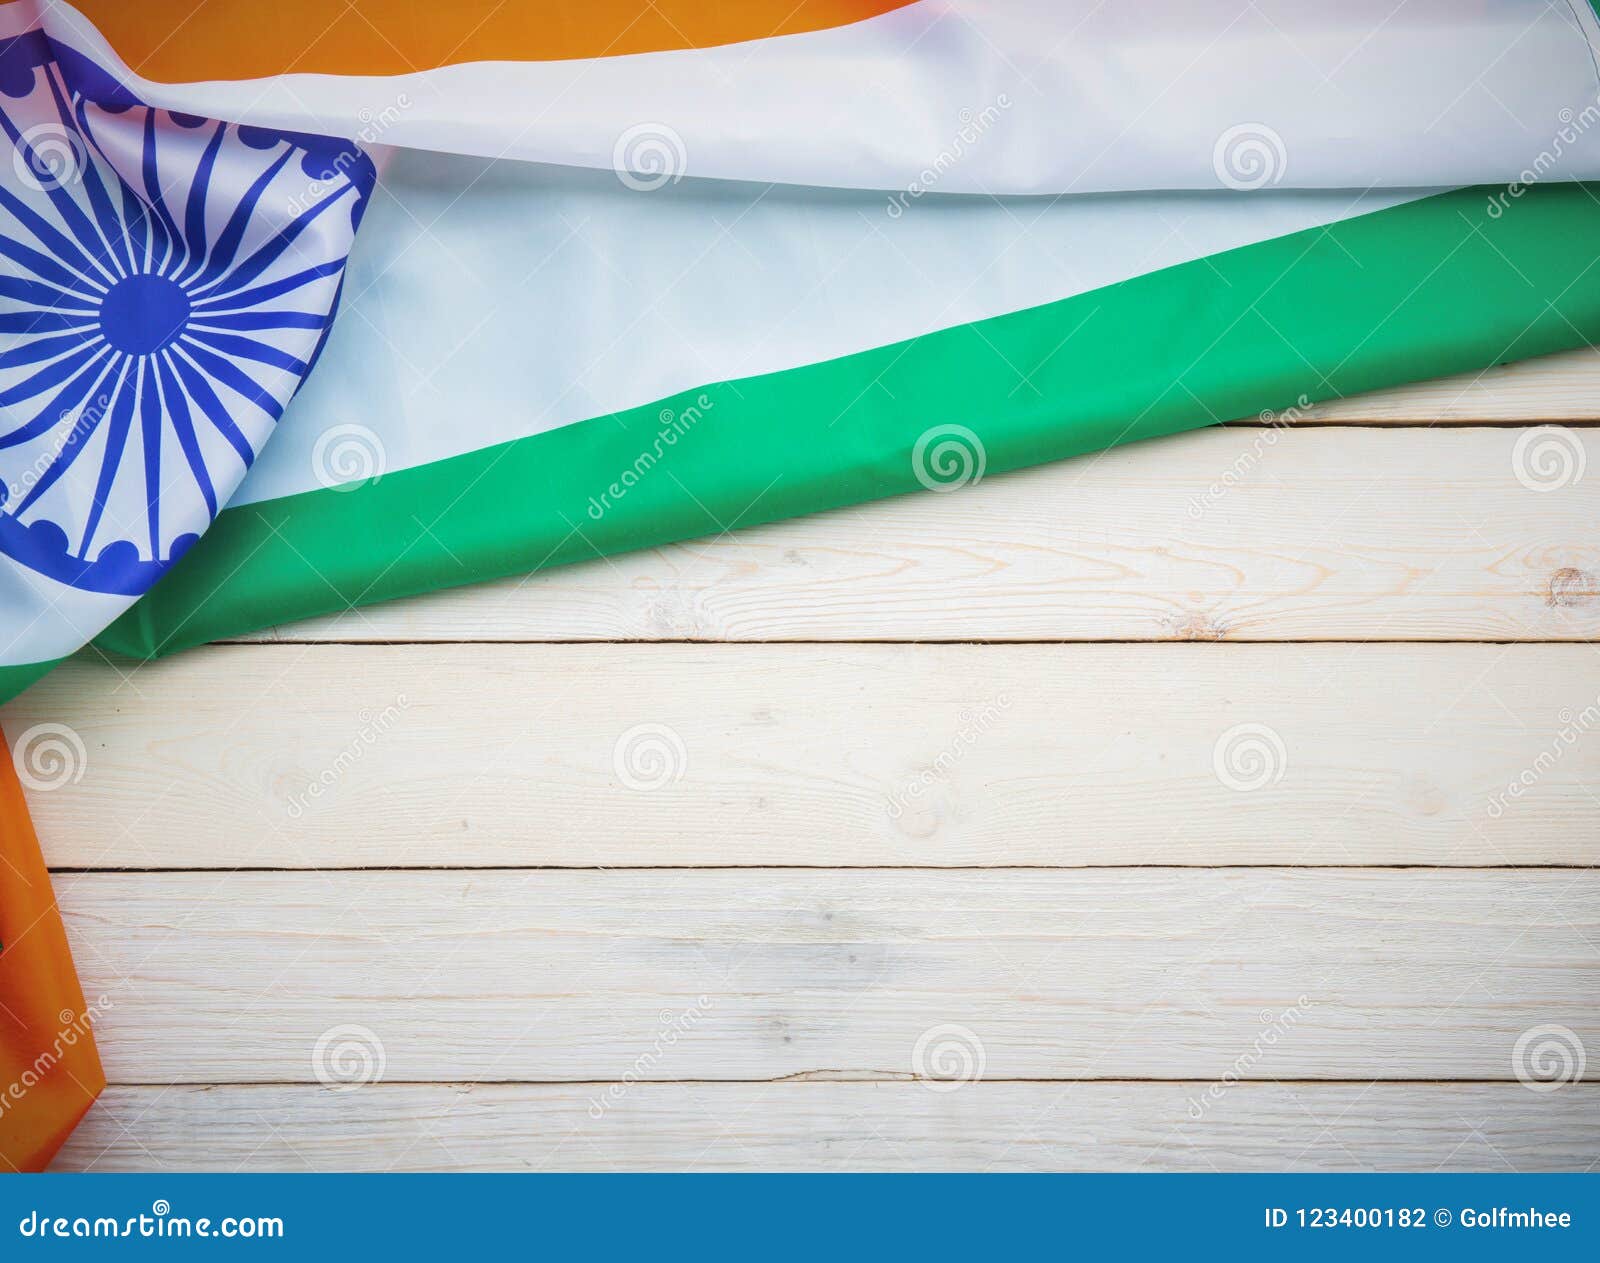 🔥 Indian Flag 15th August Mobile Wallpaper Full HD Wishes 15 Wishing  Images Free Download